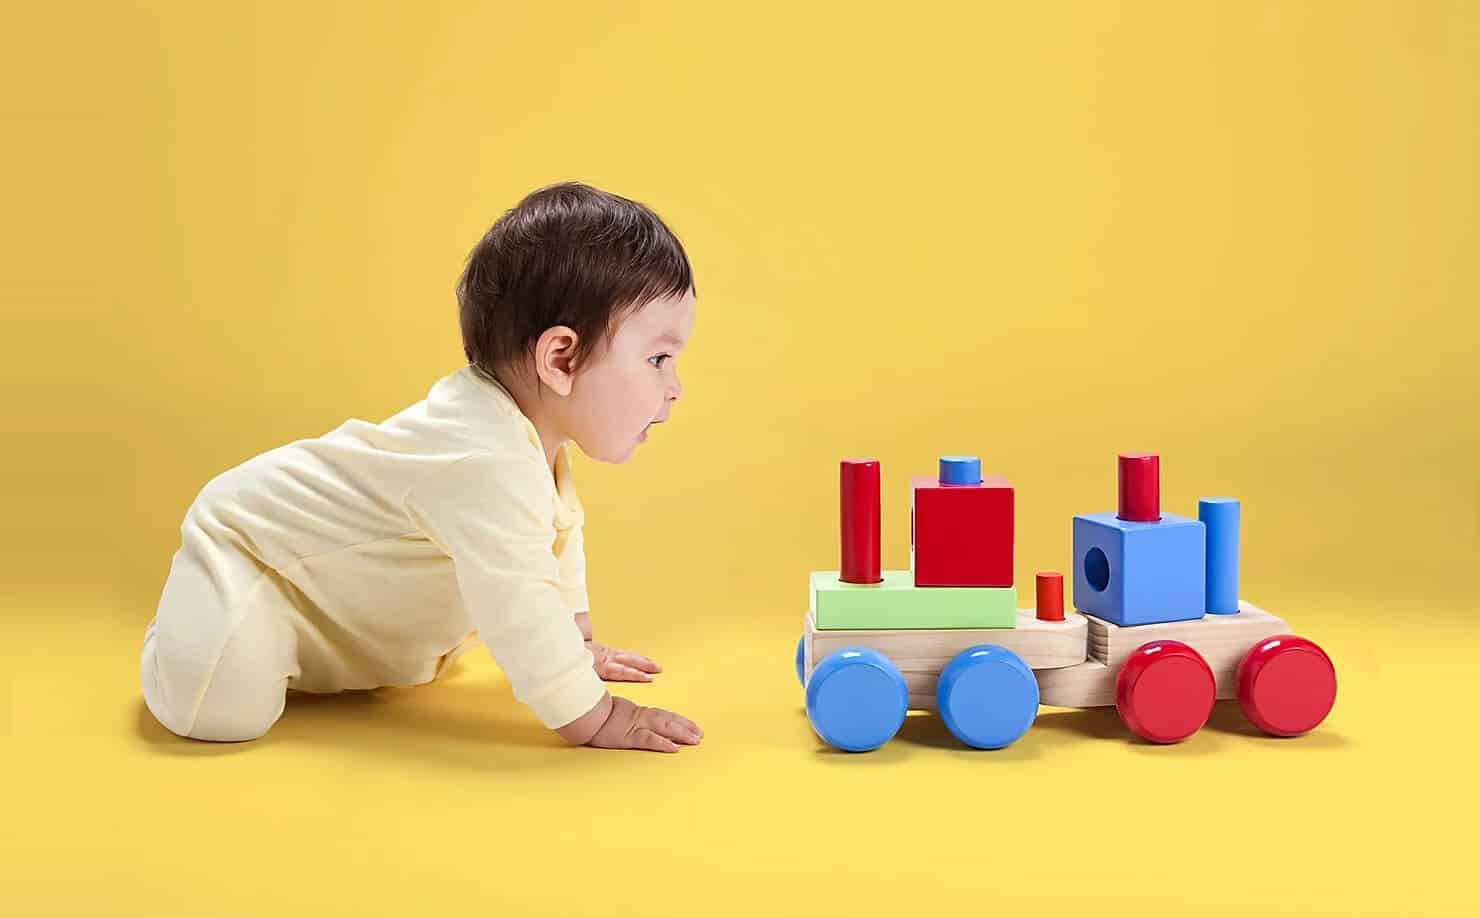 Baby Plays with Toy Train